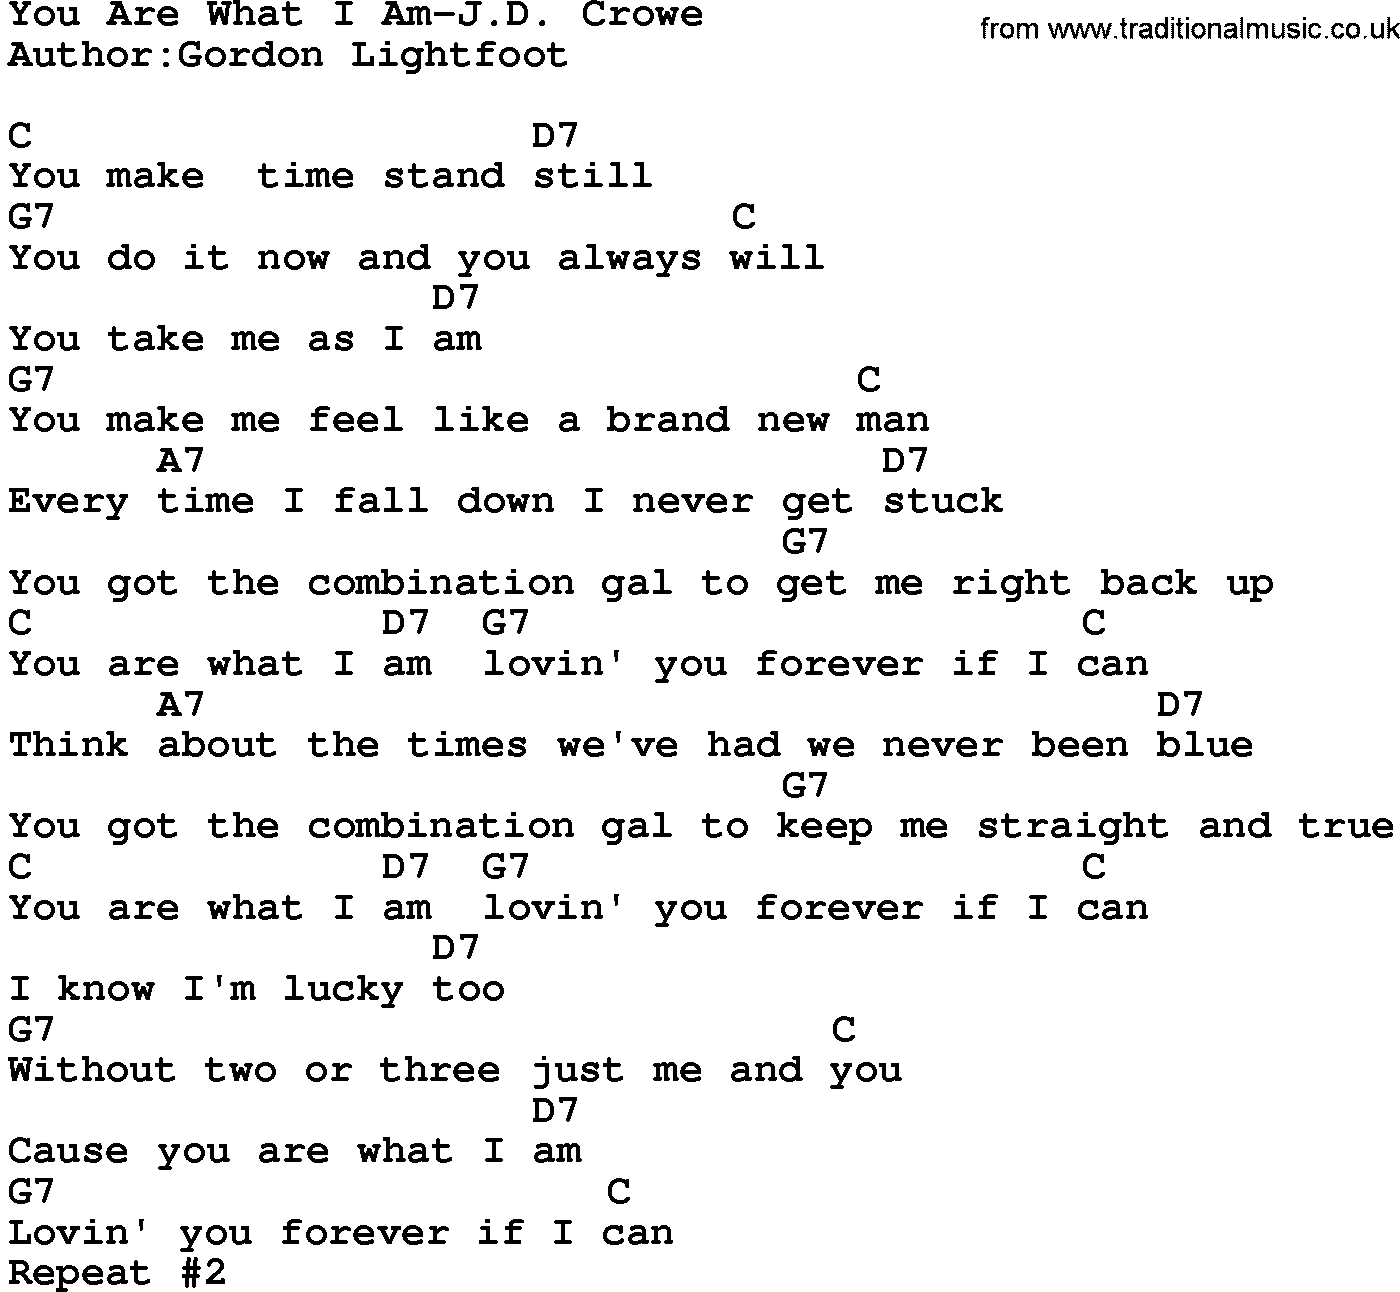 Country music song: You Are What I Am-Jd Crowe lyrics and chords